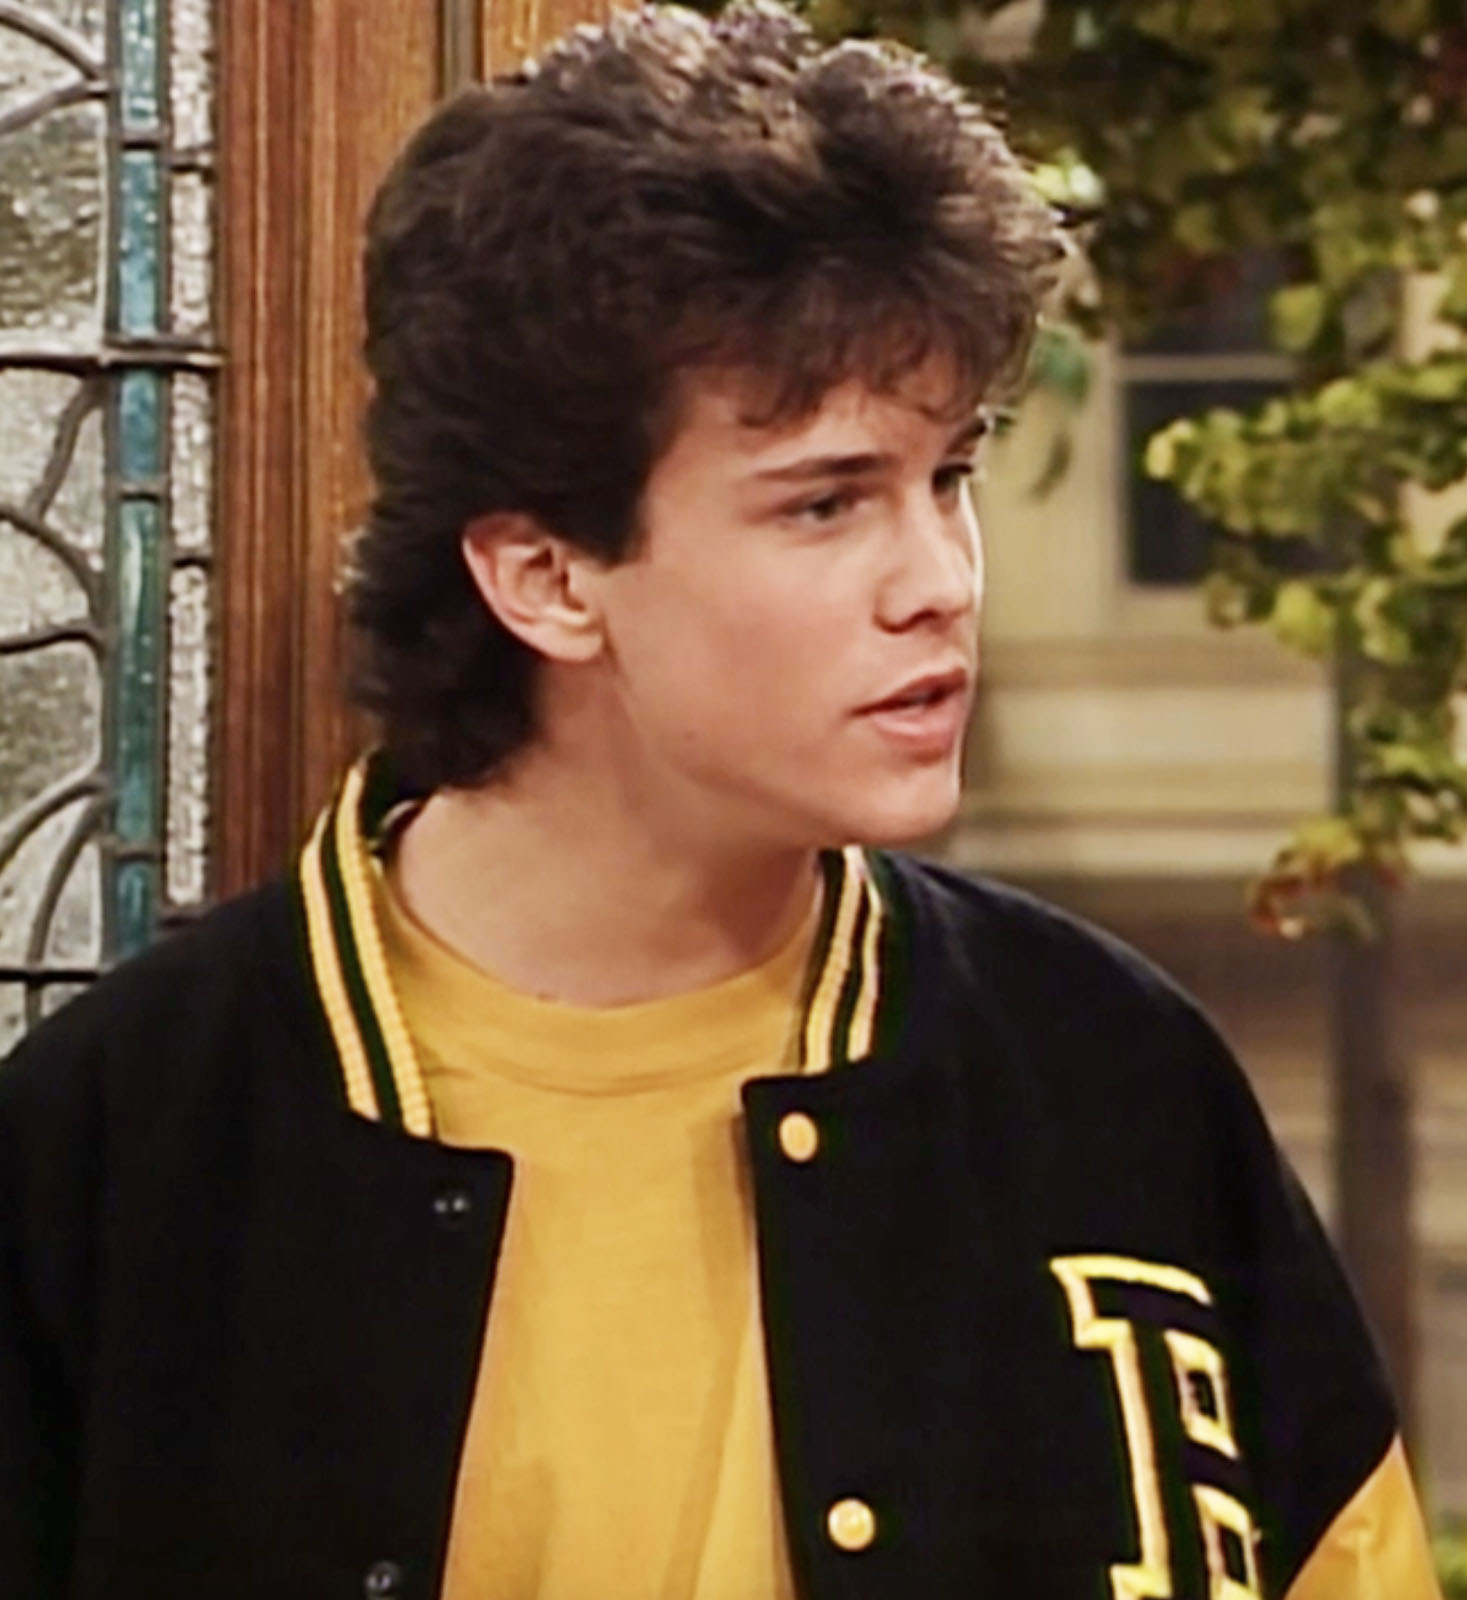 closeup of the character wearing a letterman jacket